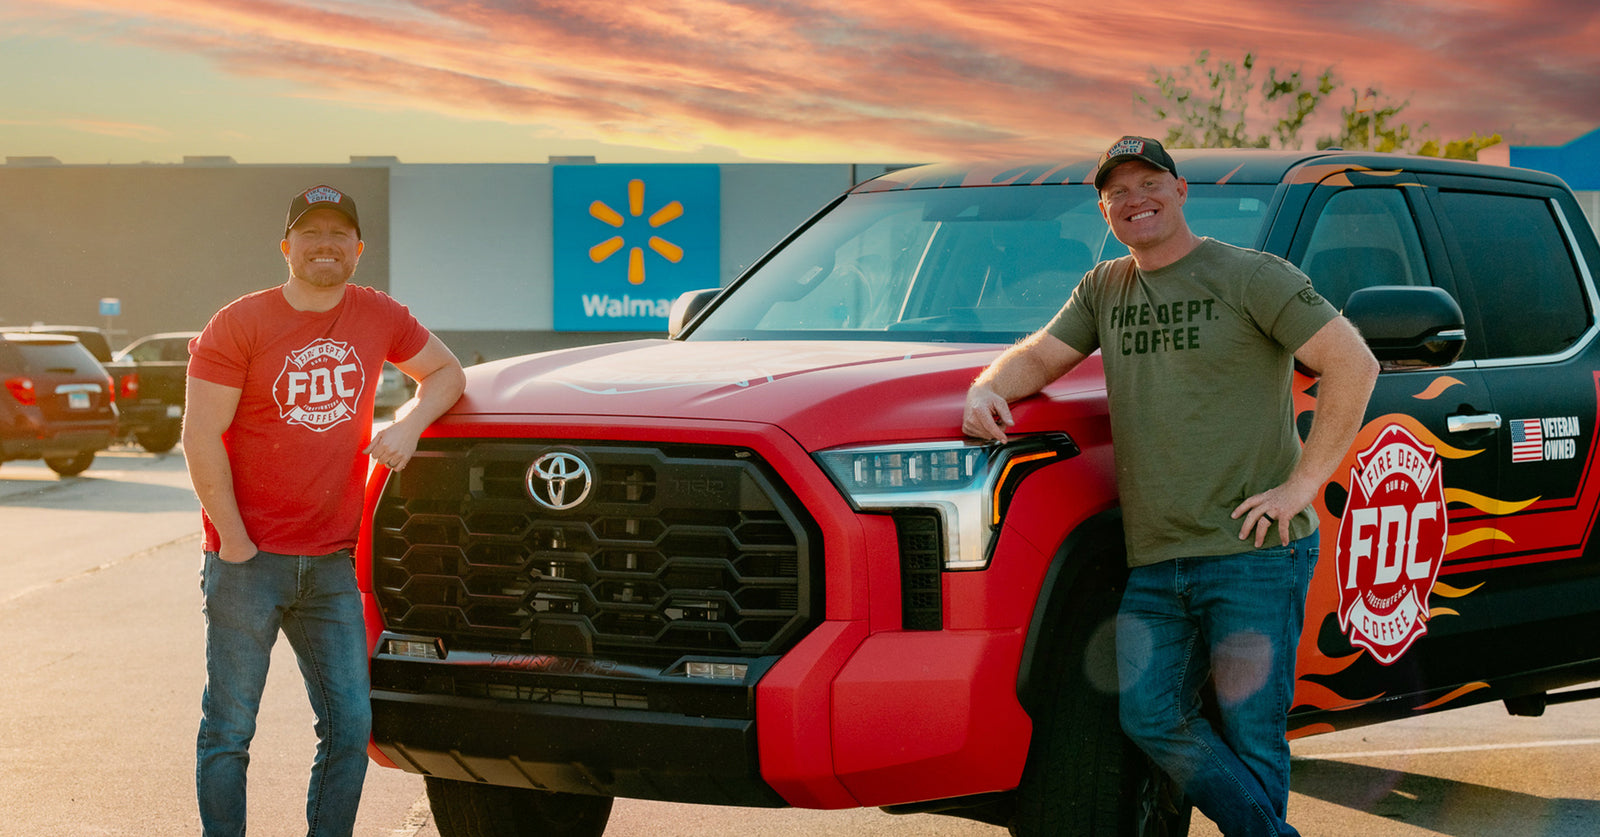 Jason Patton, VP of FDC, and Luke Schneider, CEO of FDC, standing by a red Toyota truck.